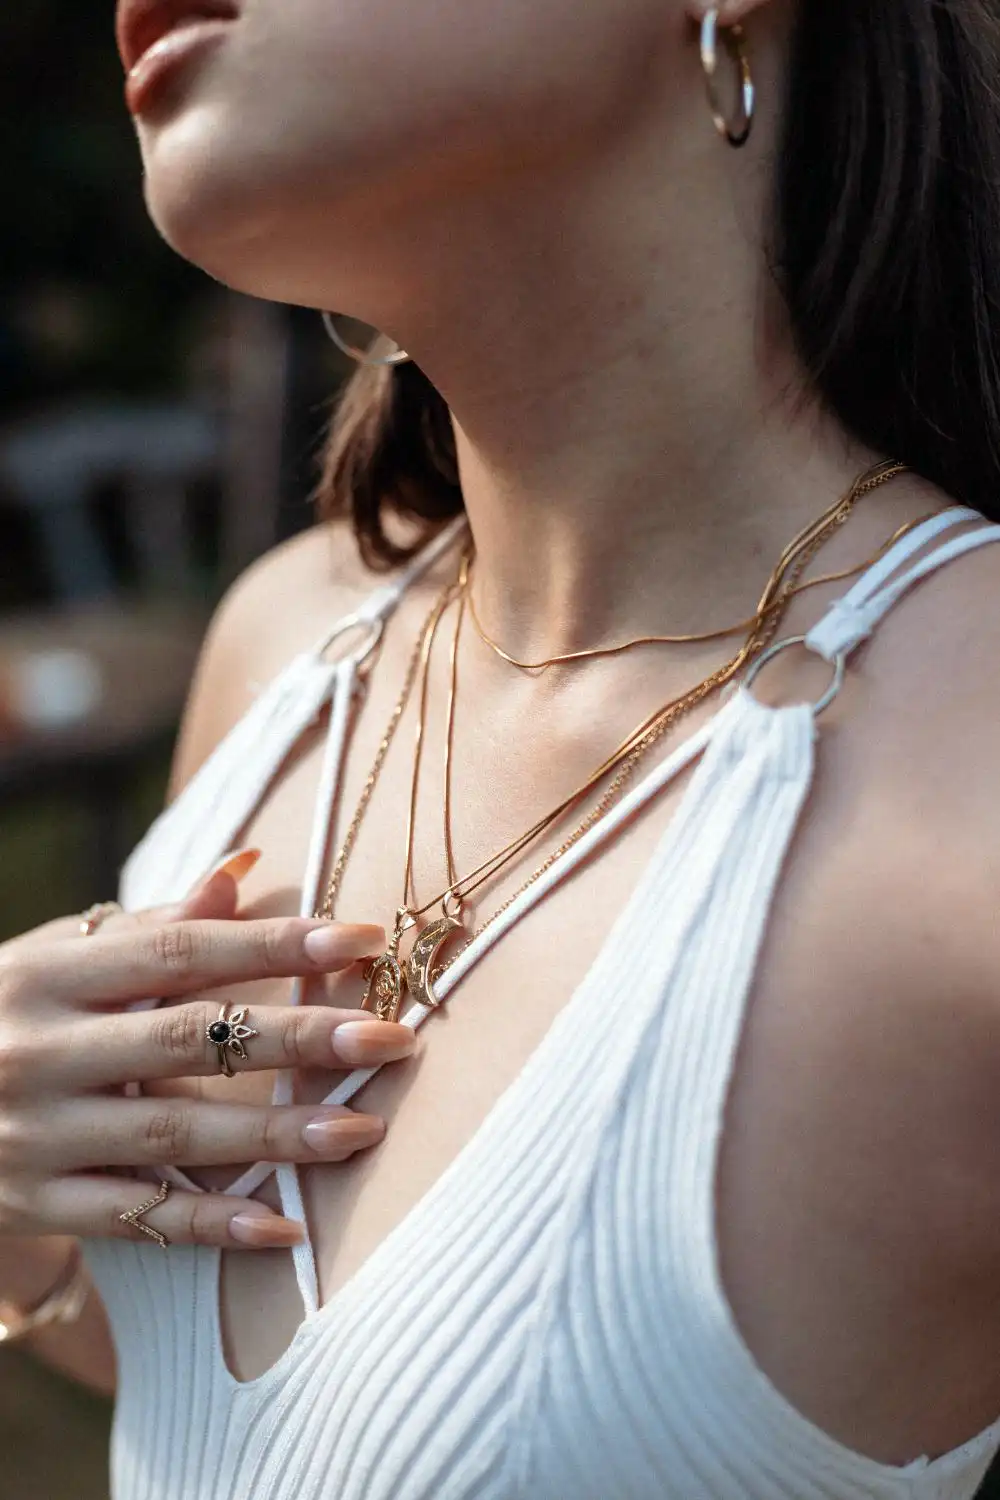 Woman Wearing Gold Necklaces, Rings, and Earrings